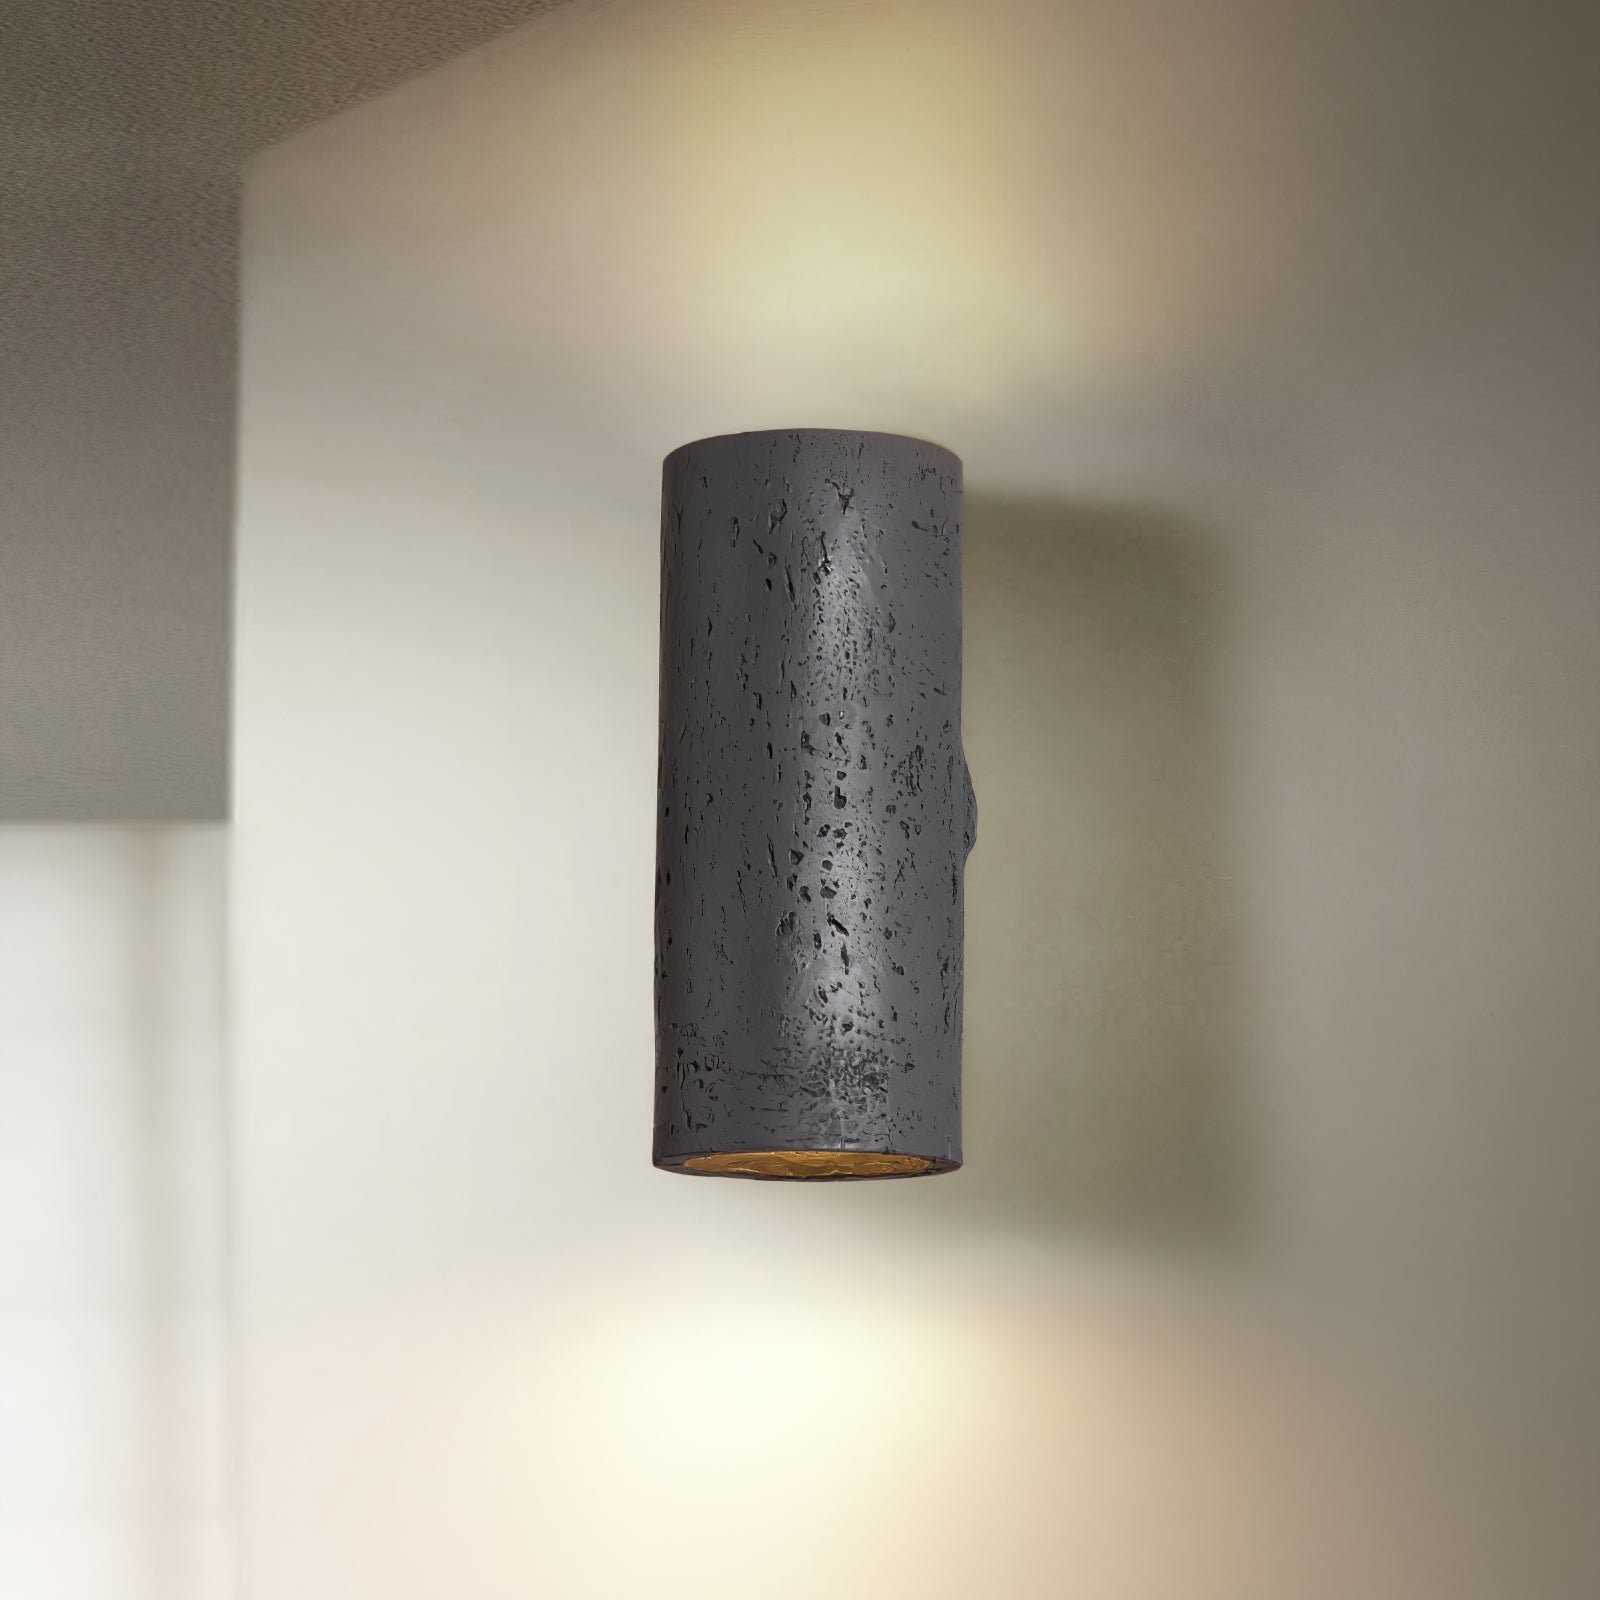 Black Hans Wall Lamp with a diameter of 3.9 inches and a height of 9 inches (10cm x 23cm)